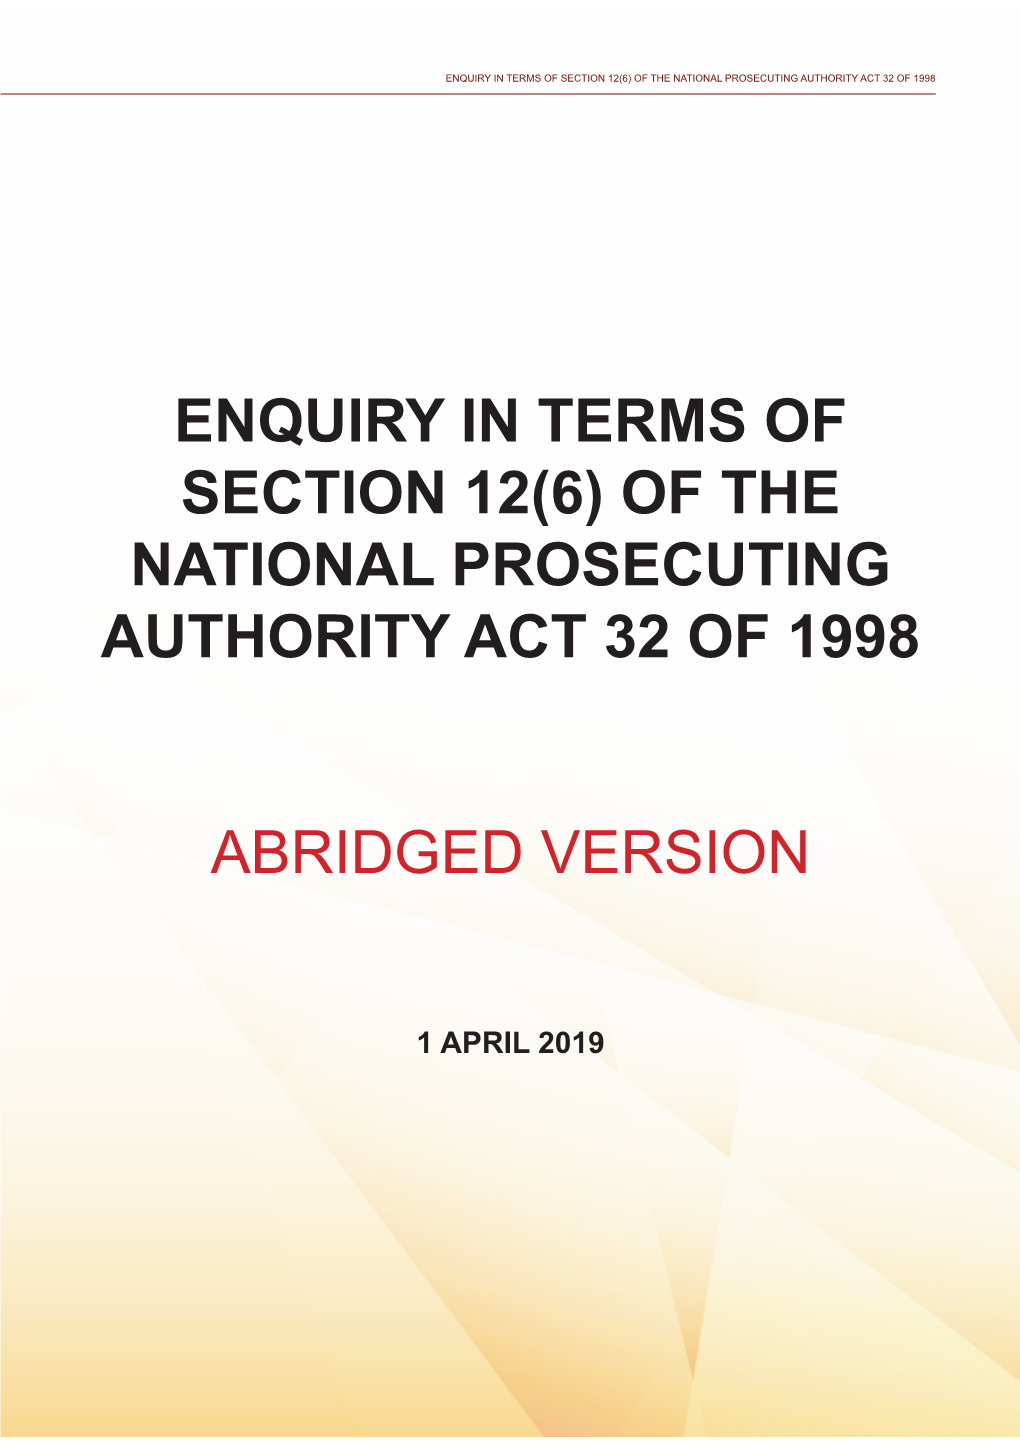 Enquiry in Terms of Section 12(6) of the National Prosecuting Authority Act 32 of 1998 Abridged Version